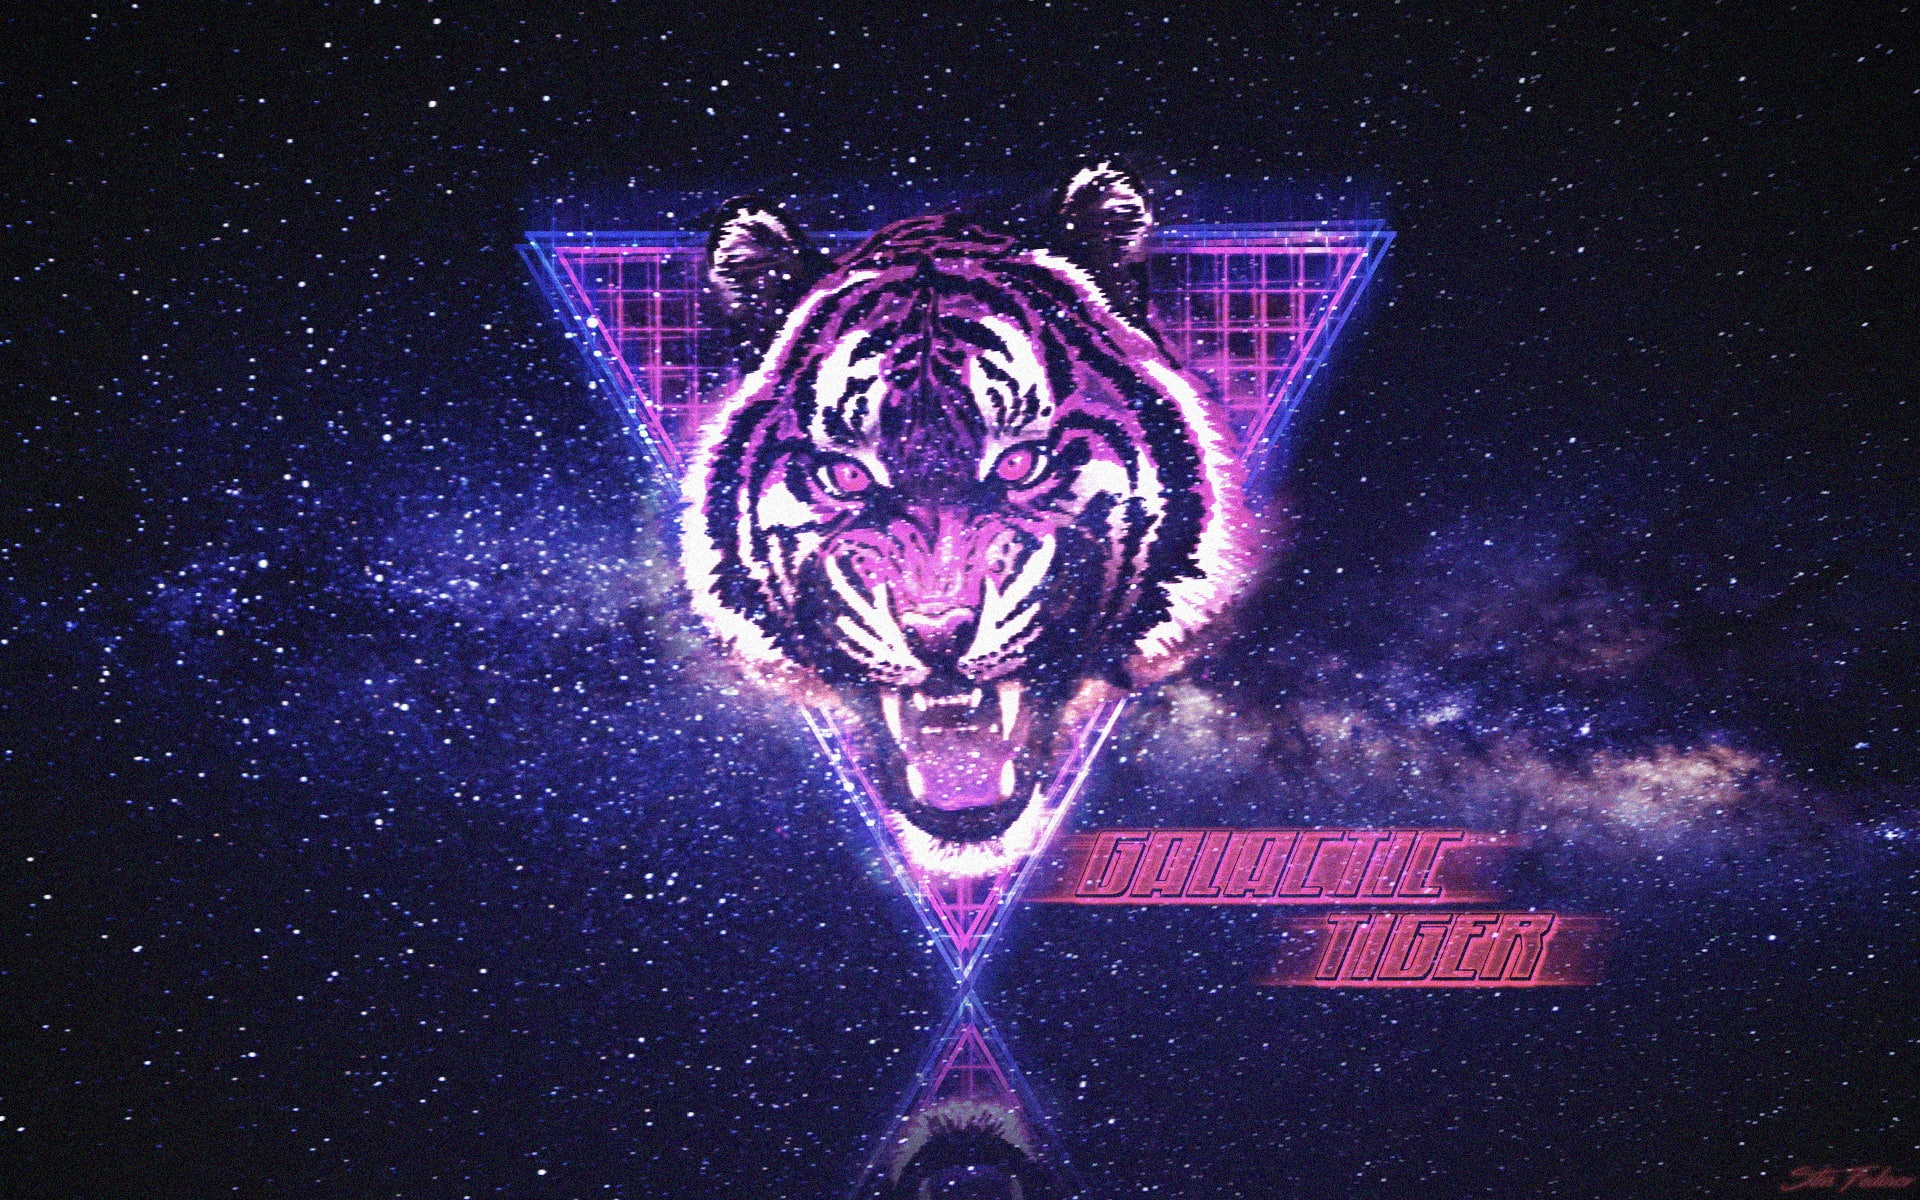 neon, New Retro Wave, typography, space, Retrowave, synthwave